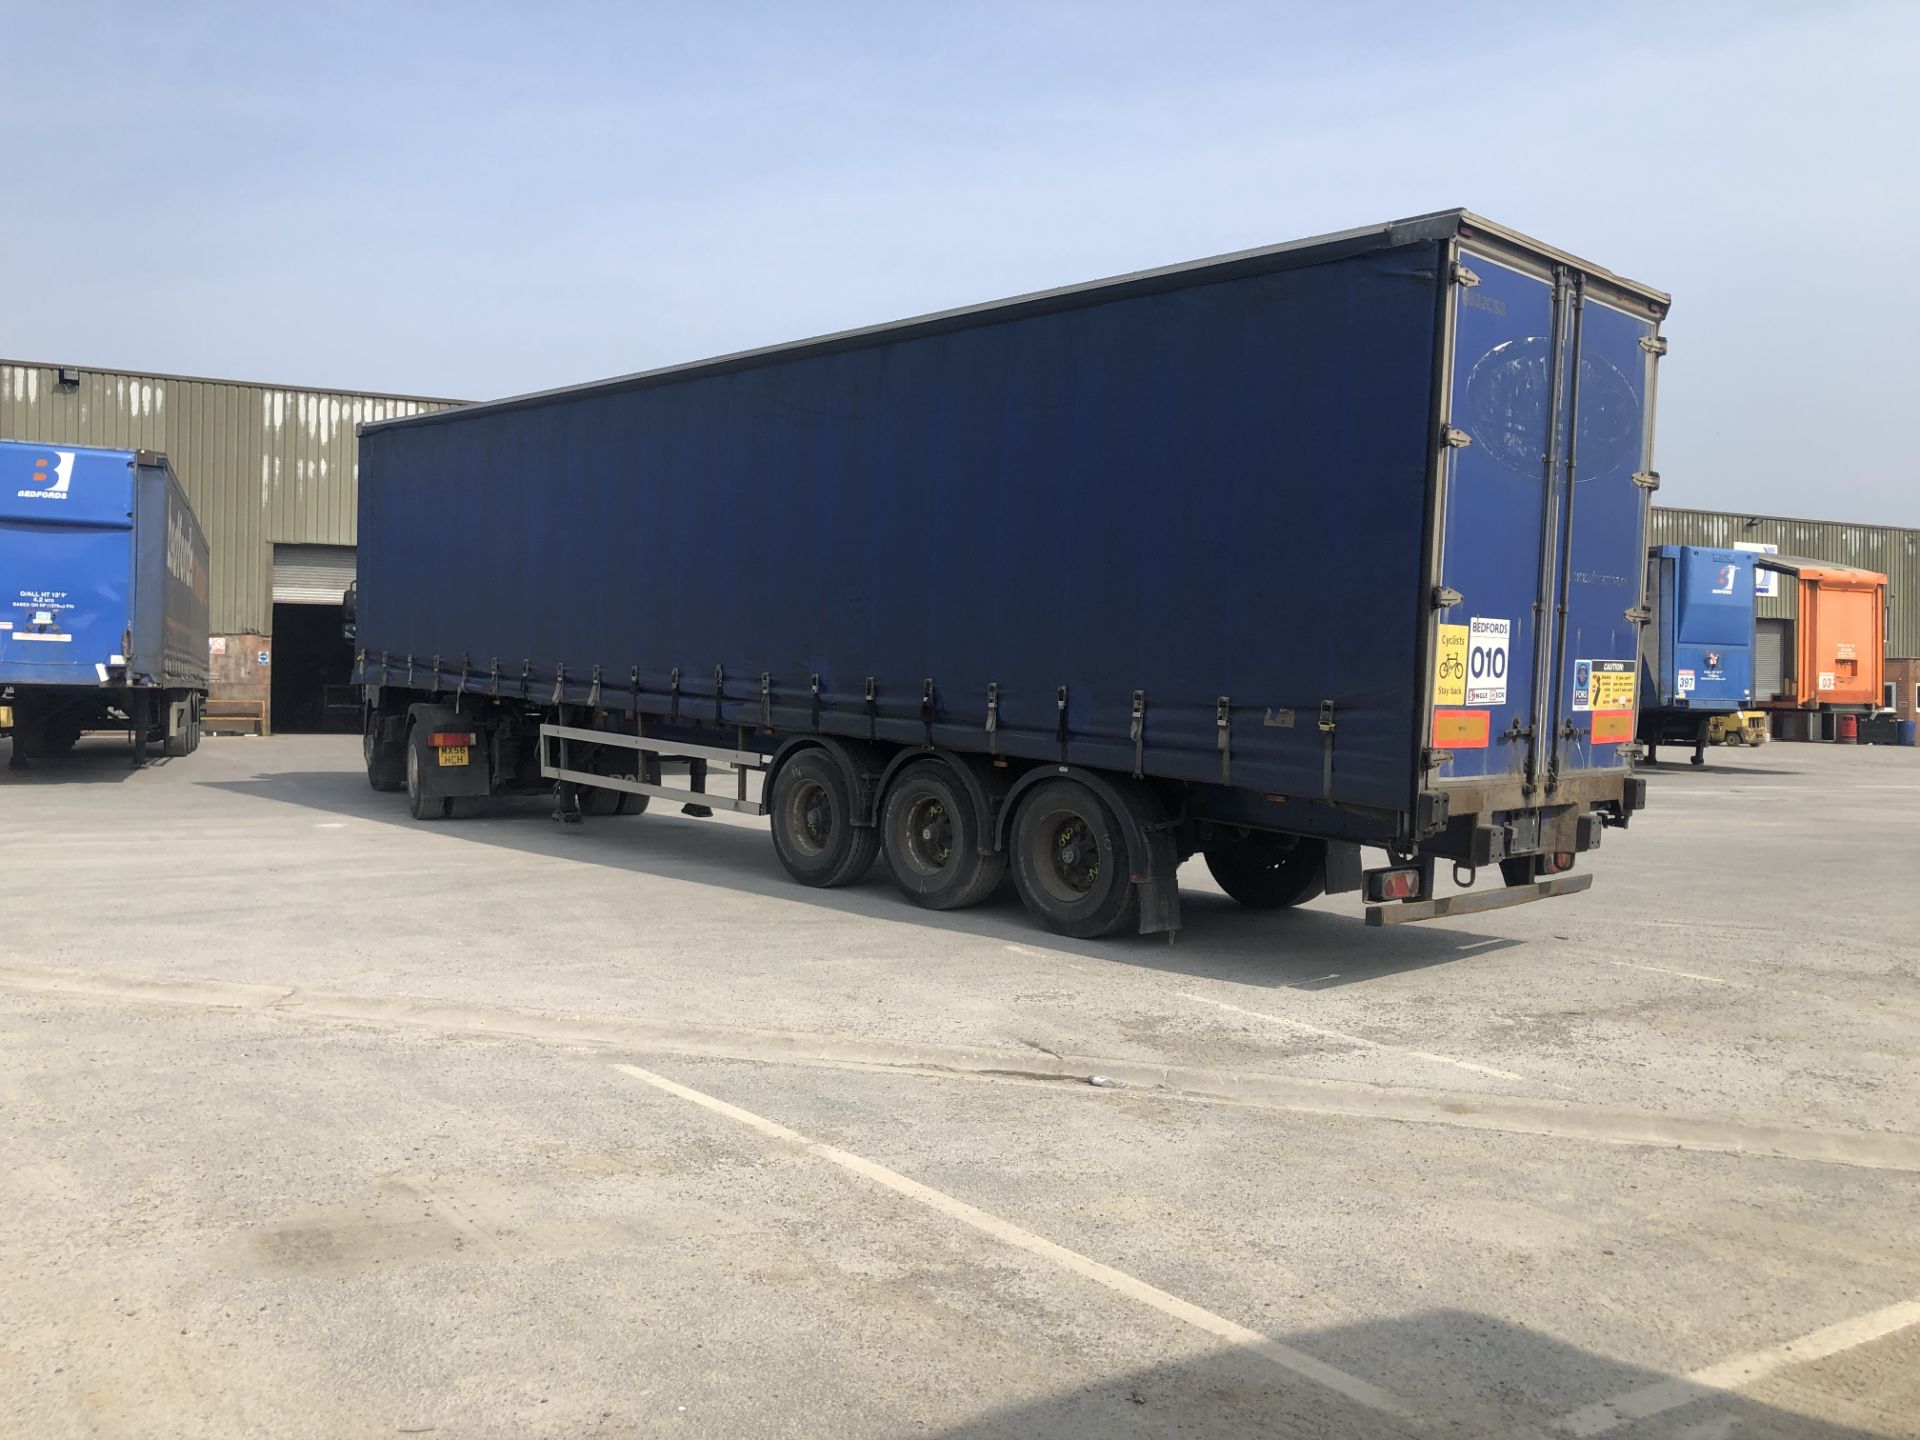 SDC 13.6m Tri-Axle Curtainside Single Deck Semi-Trailer, chassis no. AAA66681, ID no. C204162, - Image 3 of 12